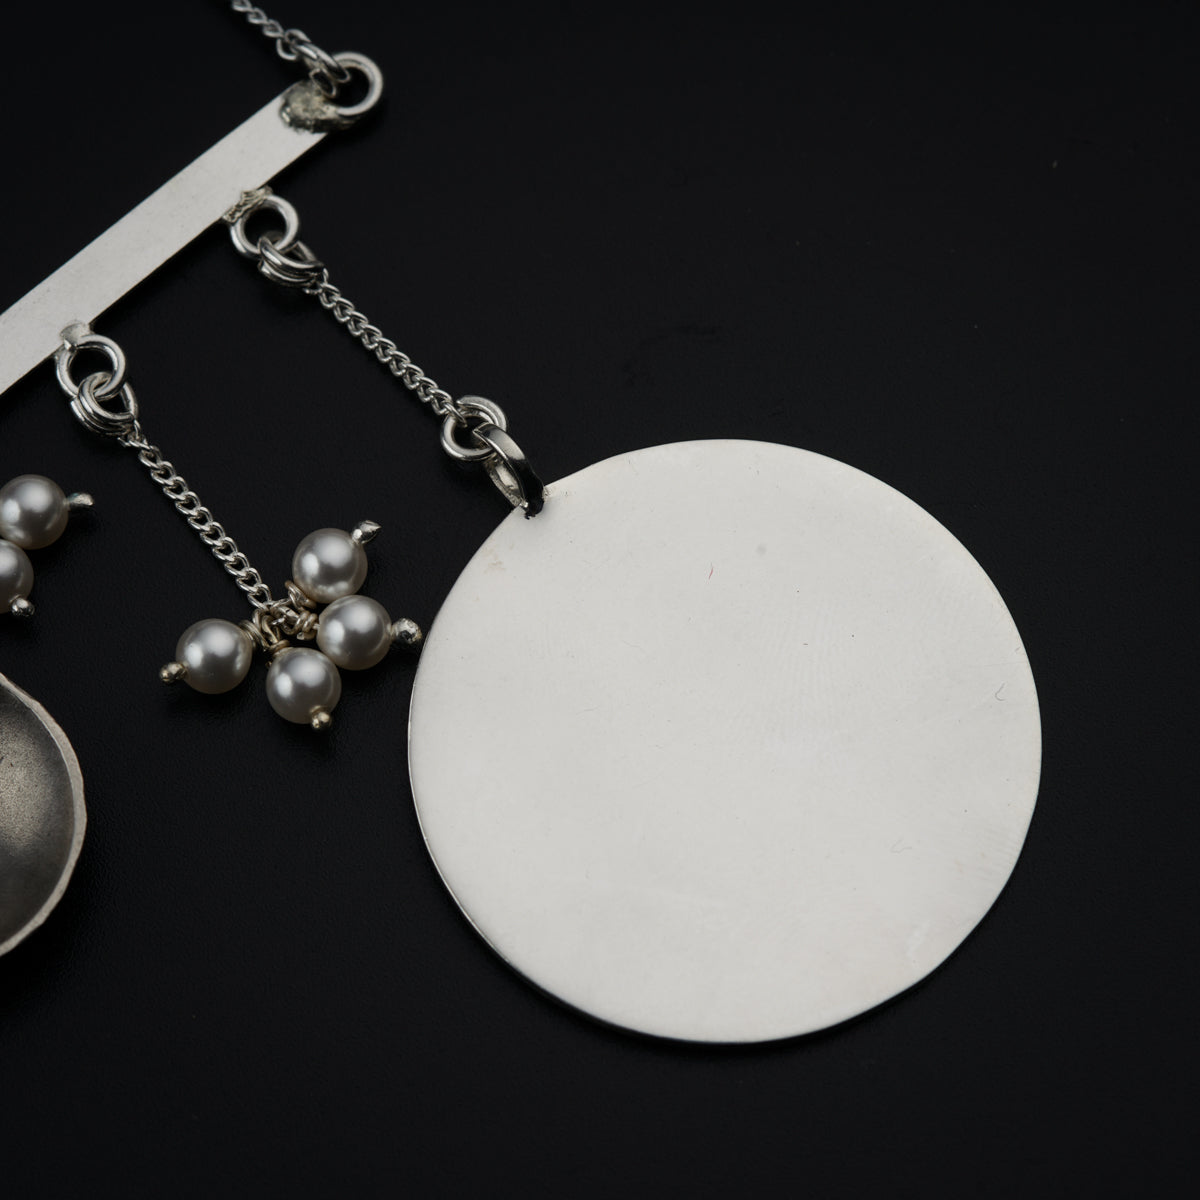 a silver spoon and a white disc on a black surface